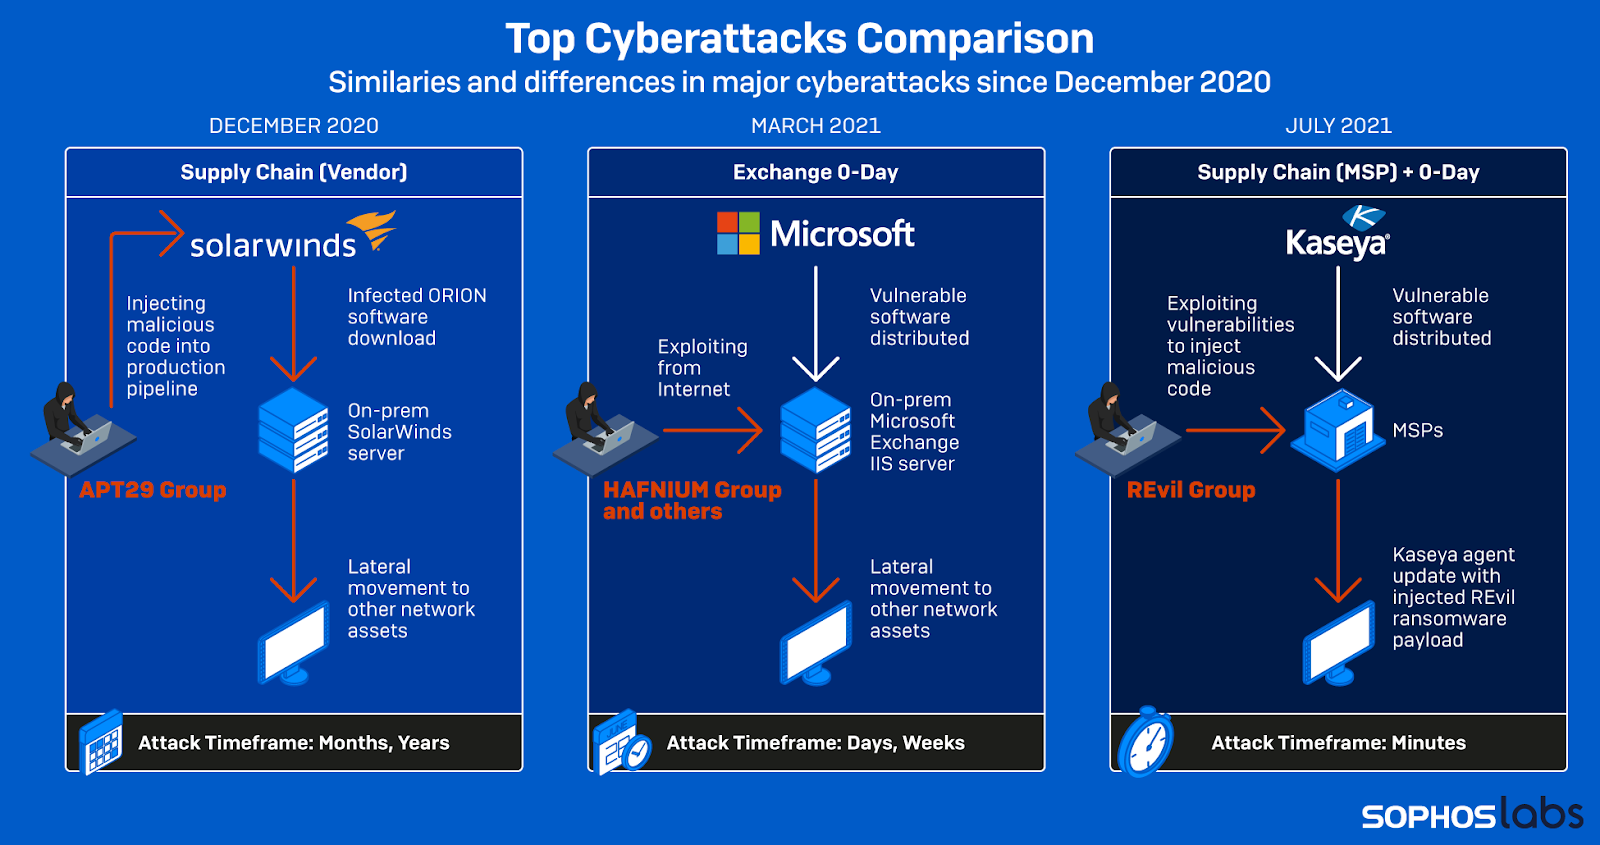 Comparison of major cyberattacks over the last two years